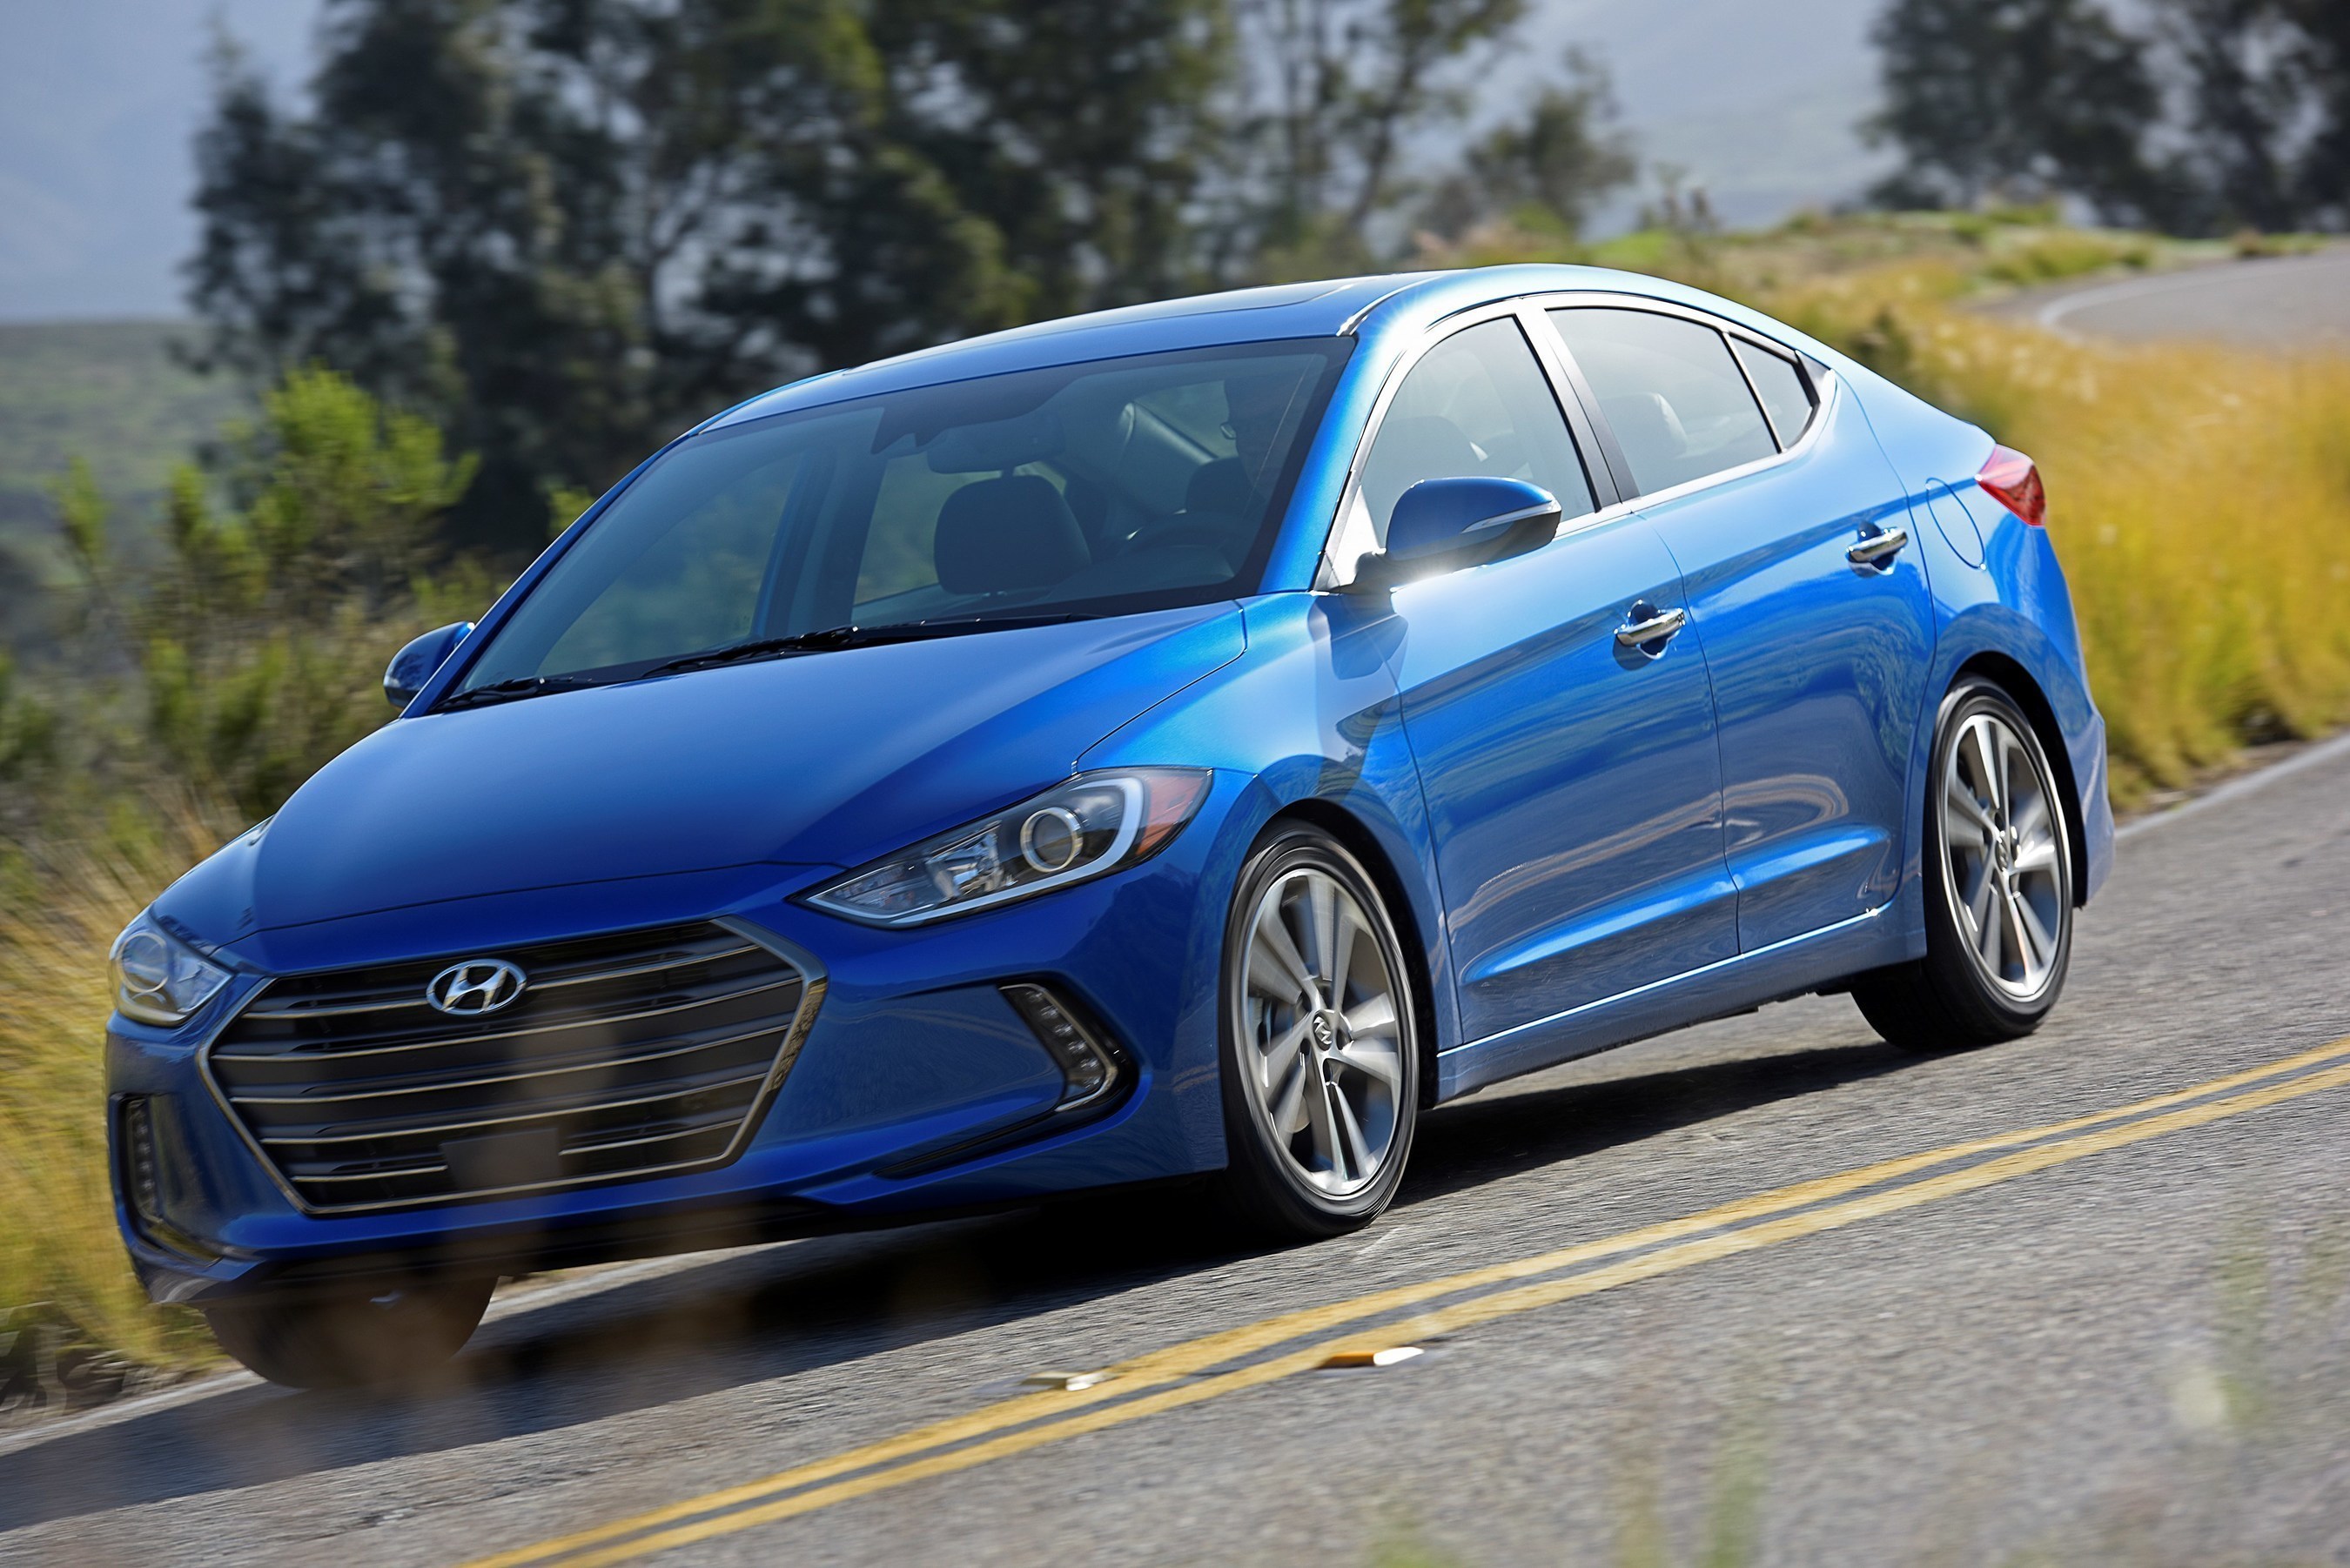 HYUNDAI ELANTRA NAMED TO WARDS 10 BEST USER EXPERIENCES LIST - The 2017 Hyundai Elantra was named to the inaugural Wards 10 Best User Experiences (UX) list. The Elantra is recognized as a value leader in this year's competition for its user-friendliness and sophistication.